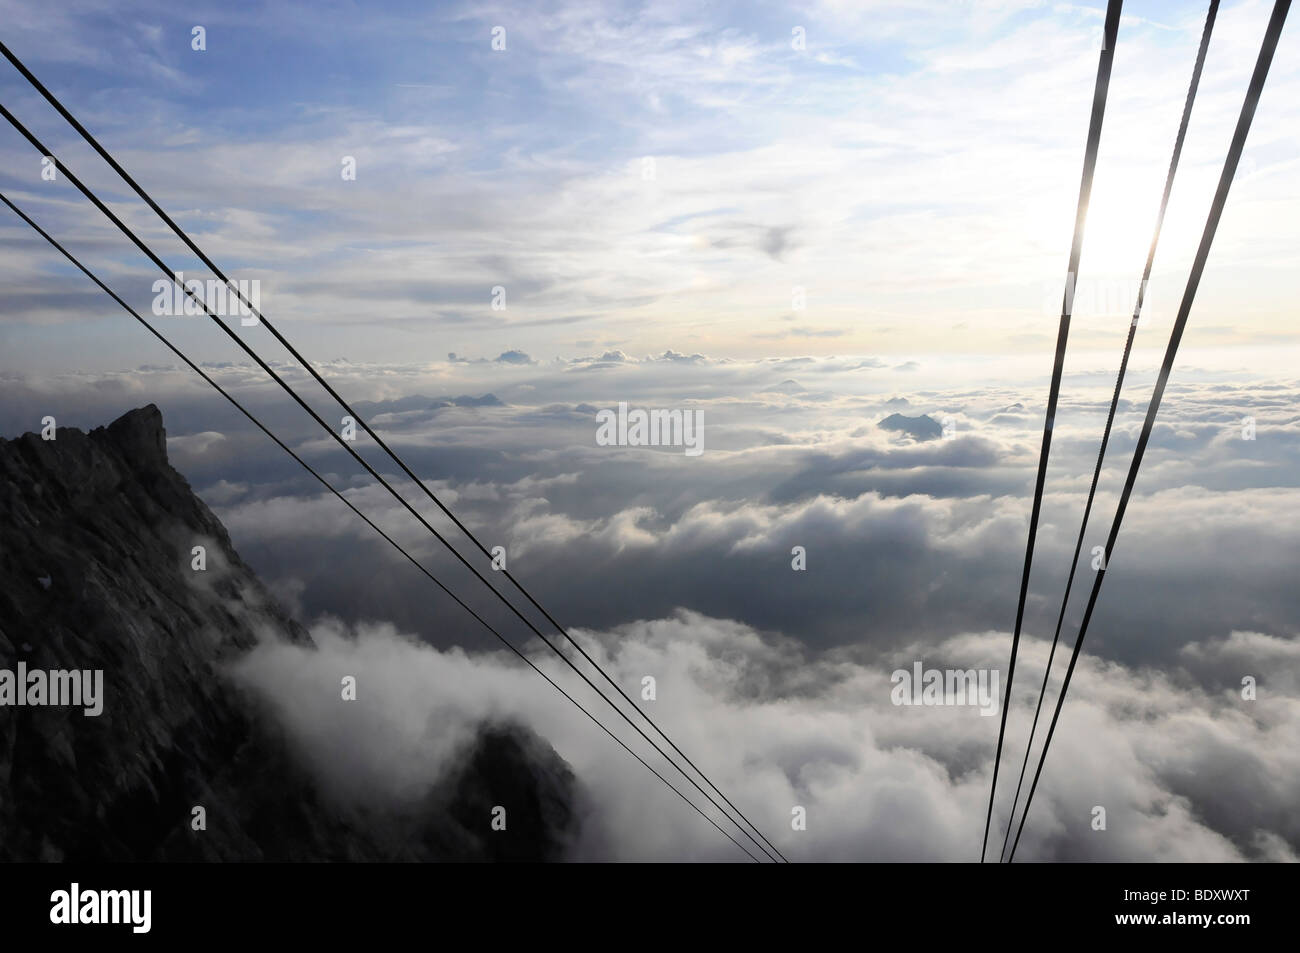 Ropes of the Tiroler Zugspitzbahnen Tyrolean Aerial Tramway in the evening light, Mt. Zugspitze, 2962 m, highest mountain in Ge Stock Photo